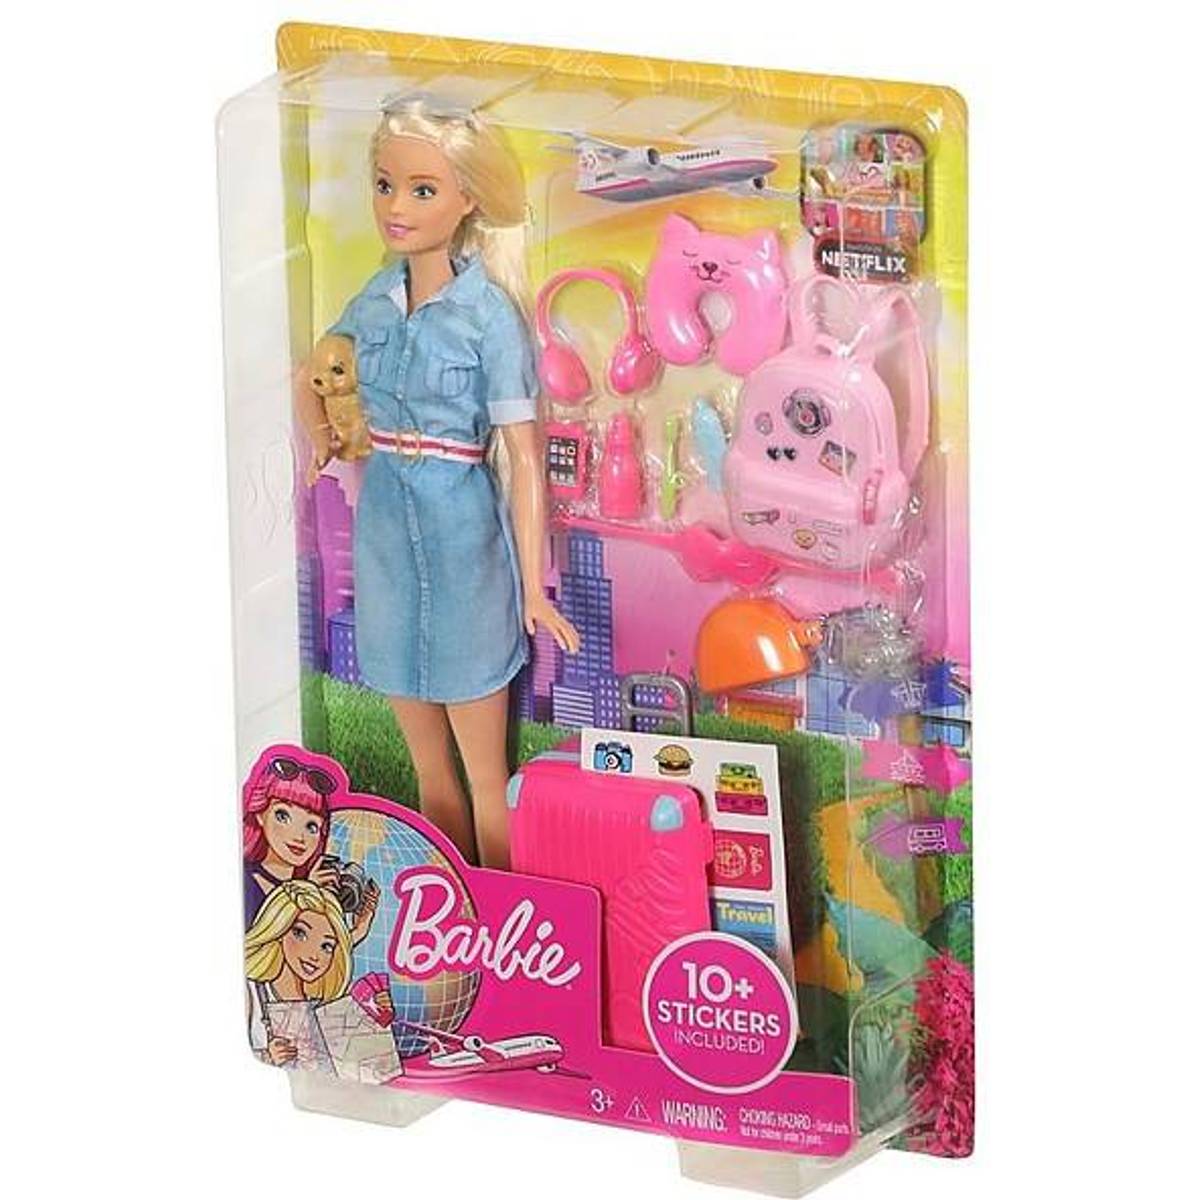 mattel barbie travel doll and accessories